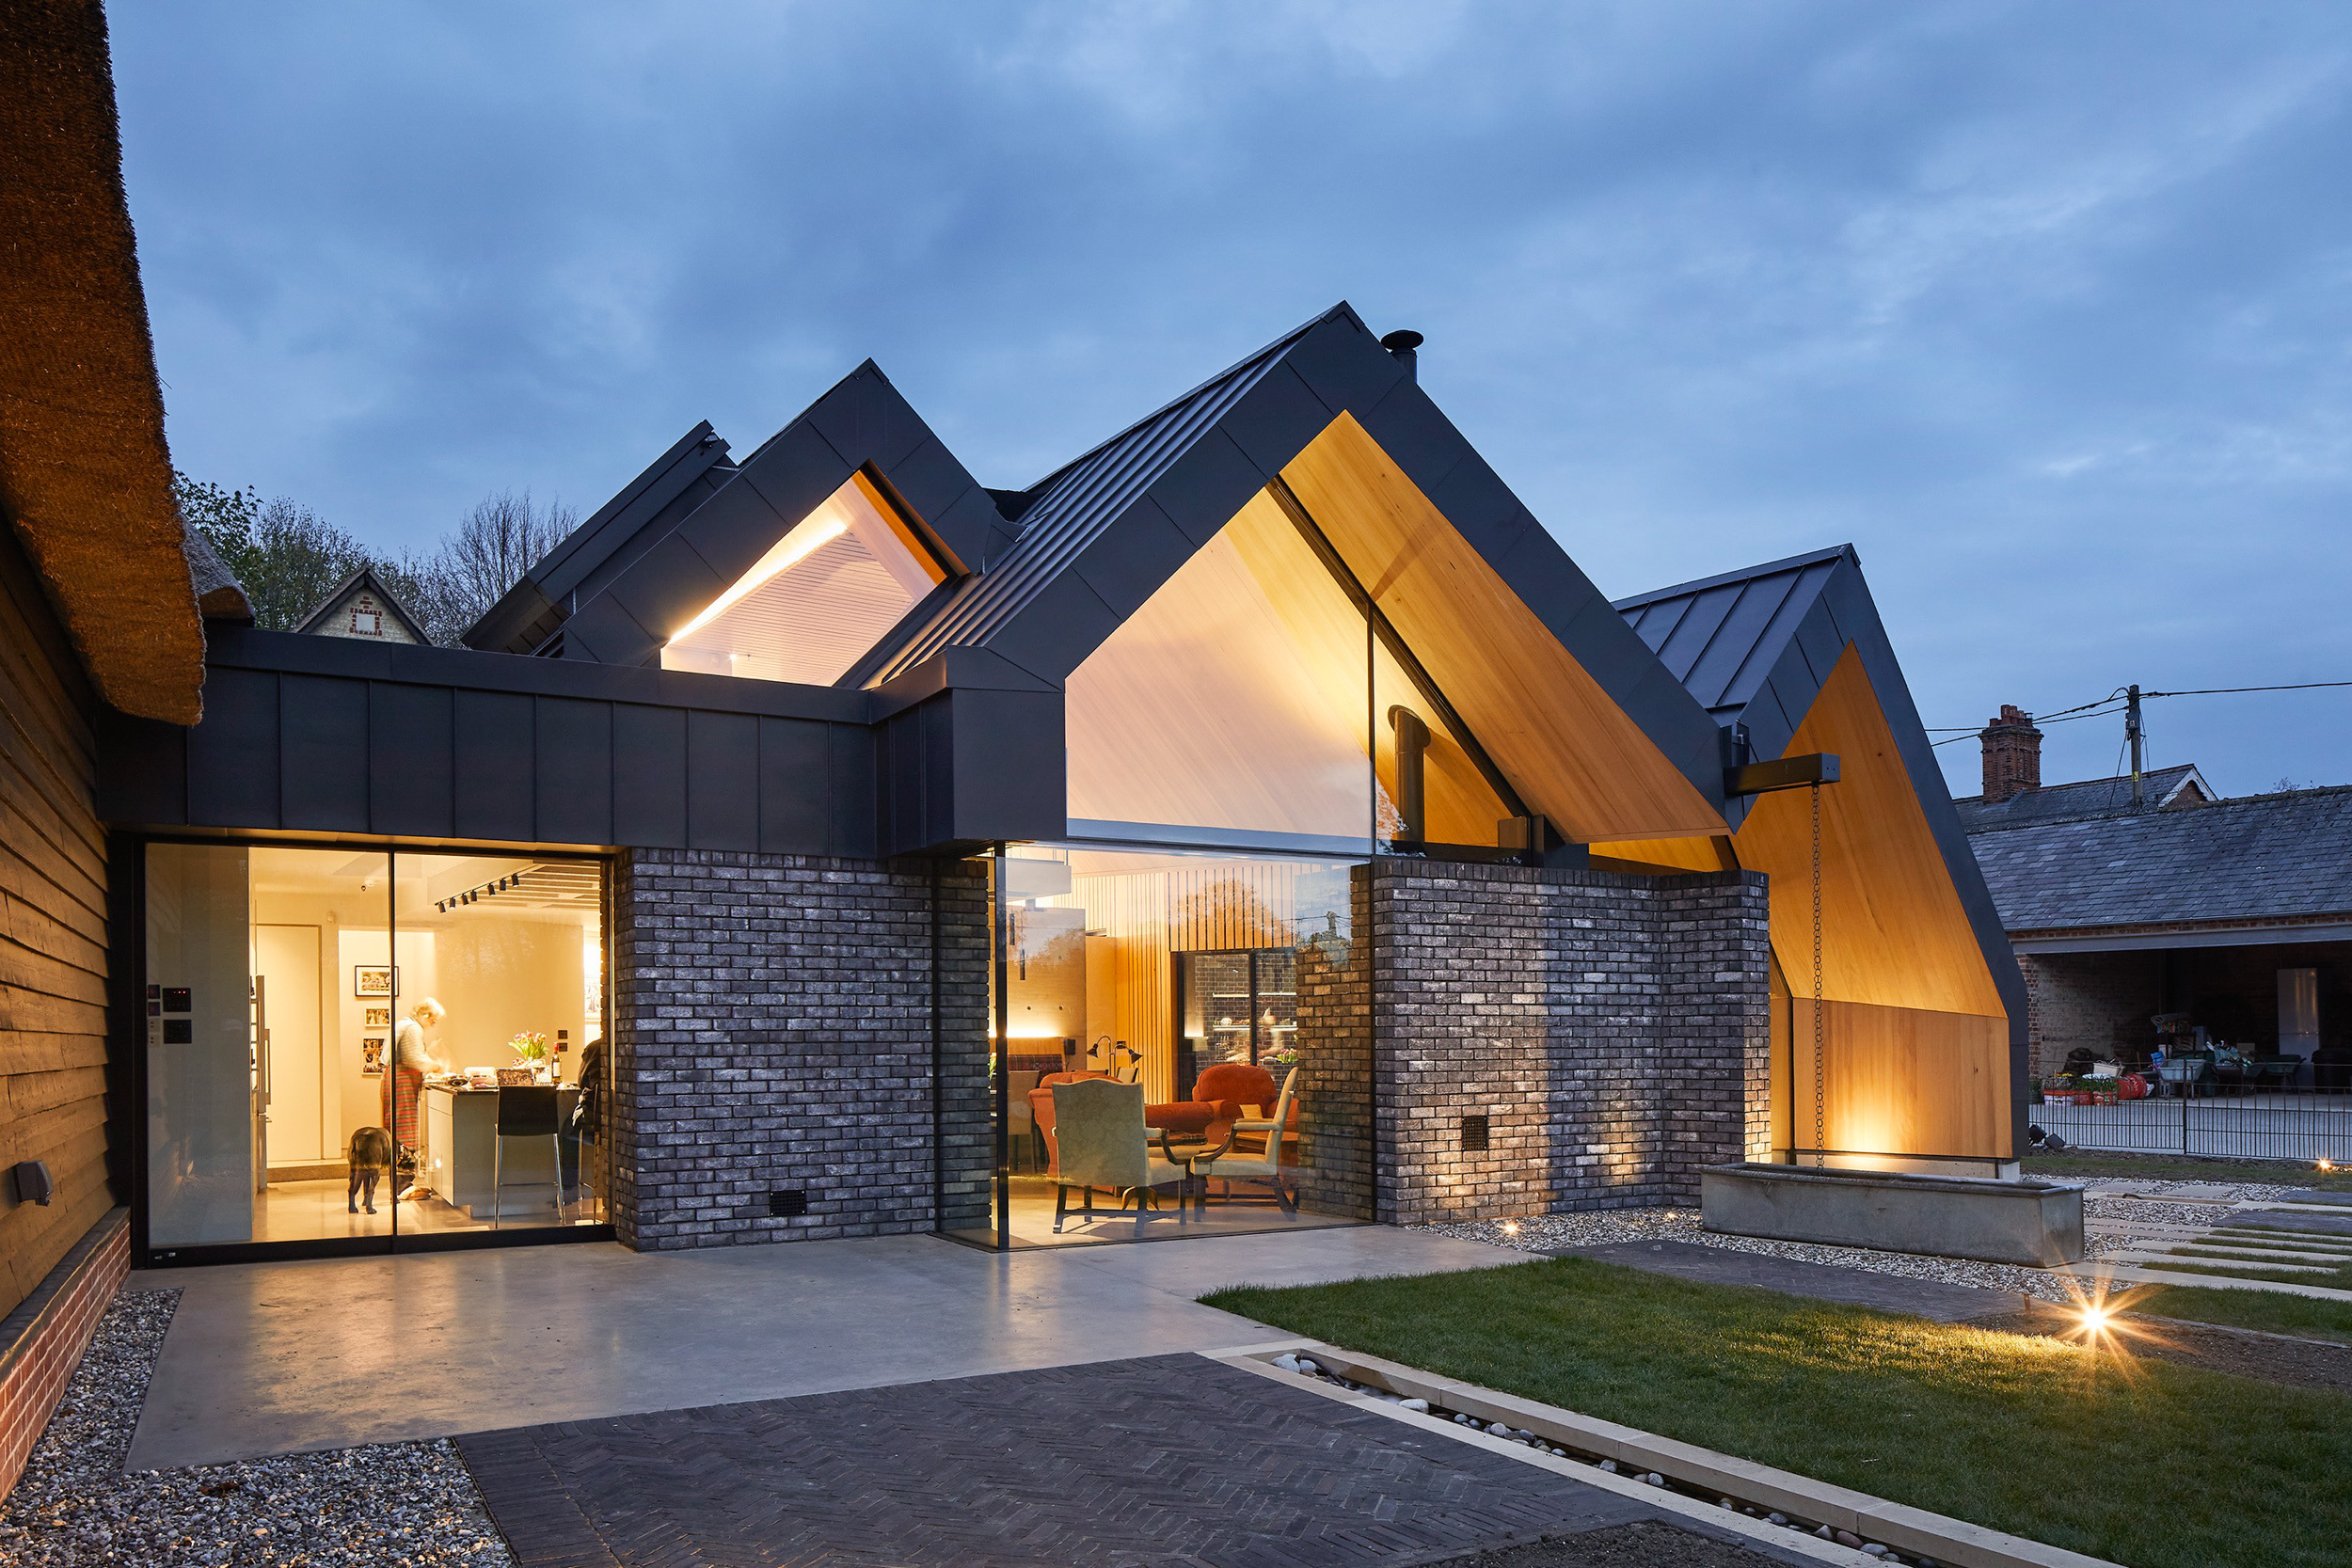 Pitched zinc roofs of Cambridgeshire house at night | cdc studio cambridge architects